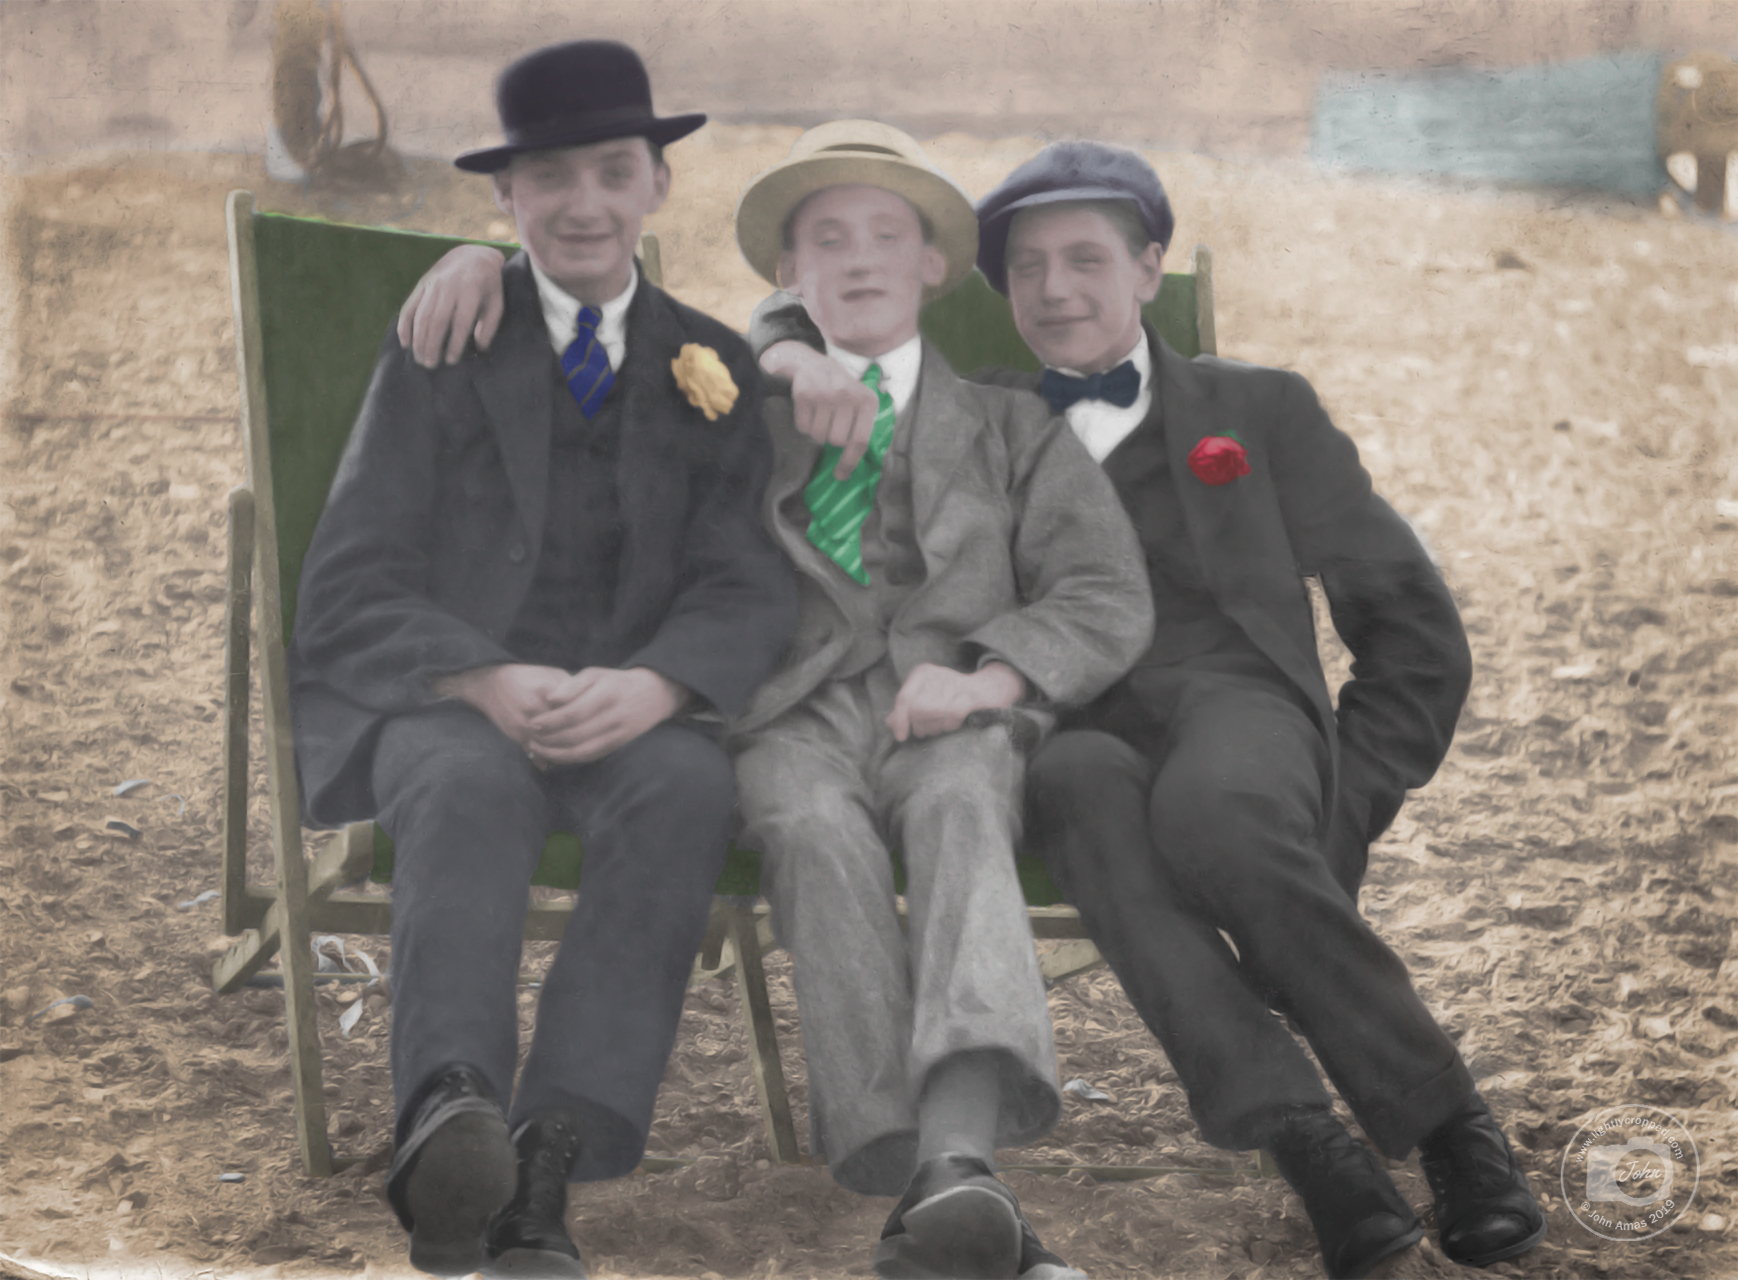 Restored and hand coloured photograph completed